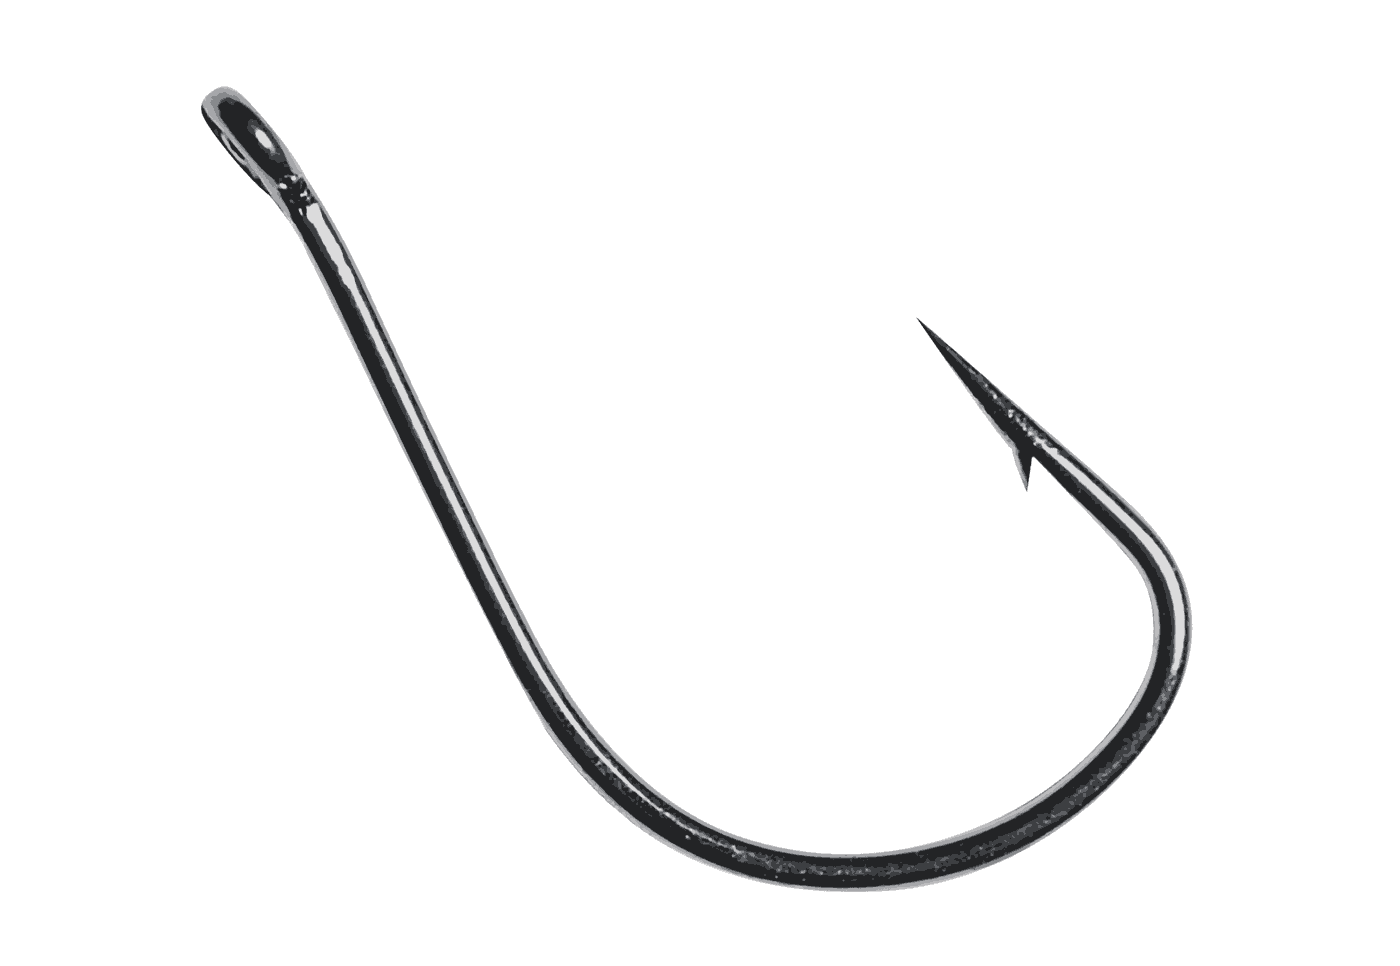 OWNER MOSQUITO BASS FISHING HOOK FINE WIRE #5377-051 SZ 6 QTY 57 